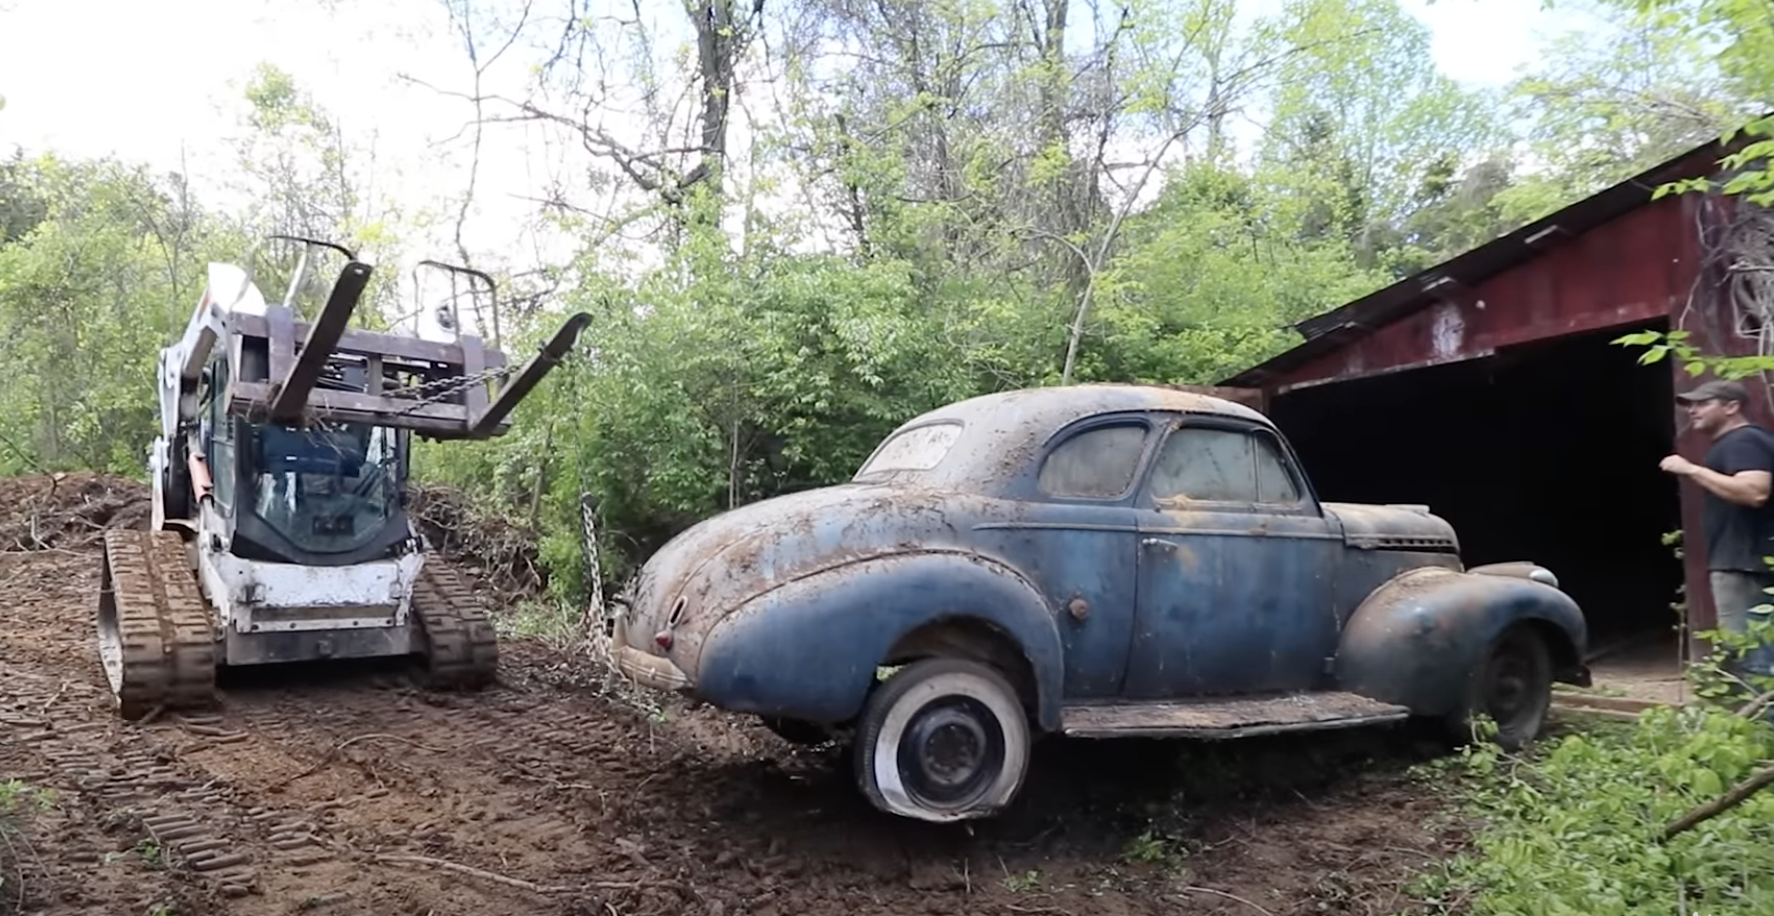 Video: Watch as a Barn Find 1940 Chevrolet Coupe is Rescued from a Collapsing Shed